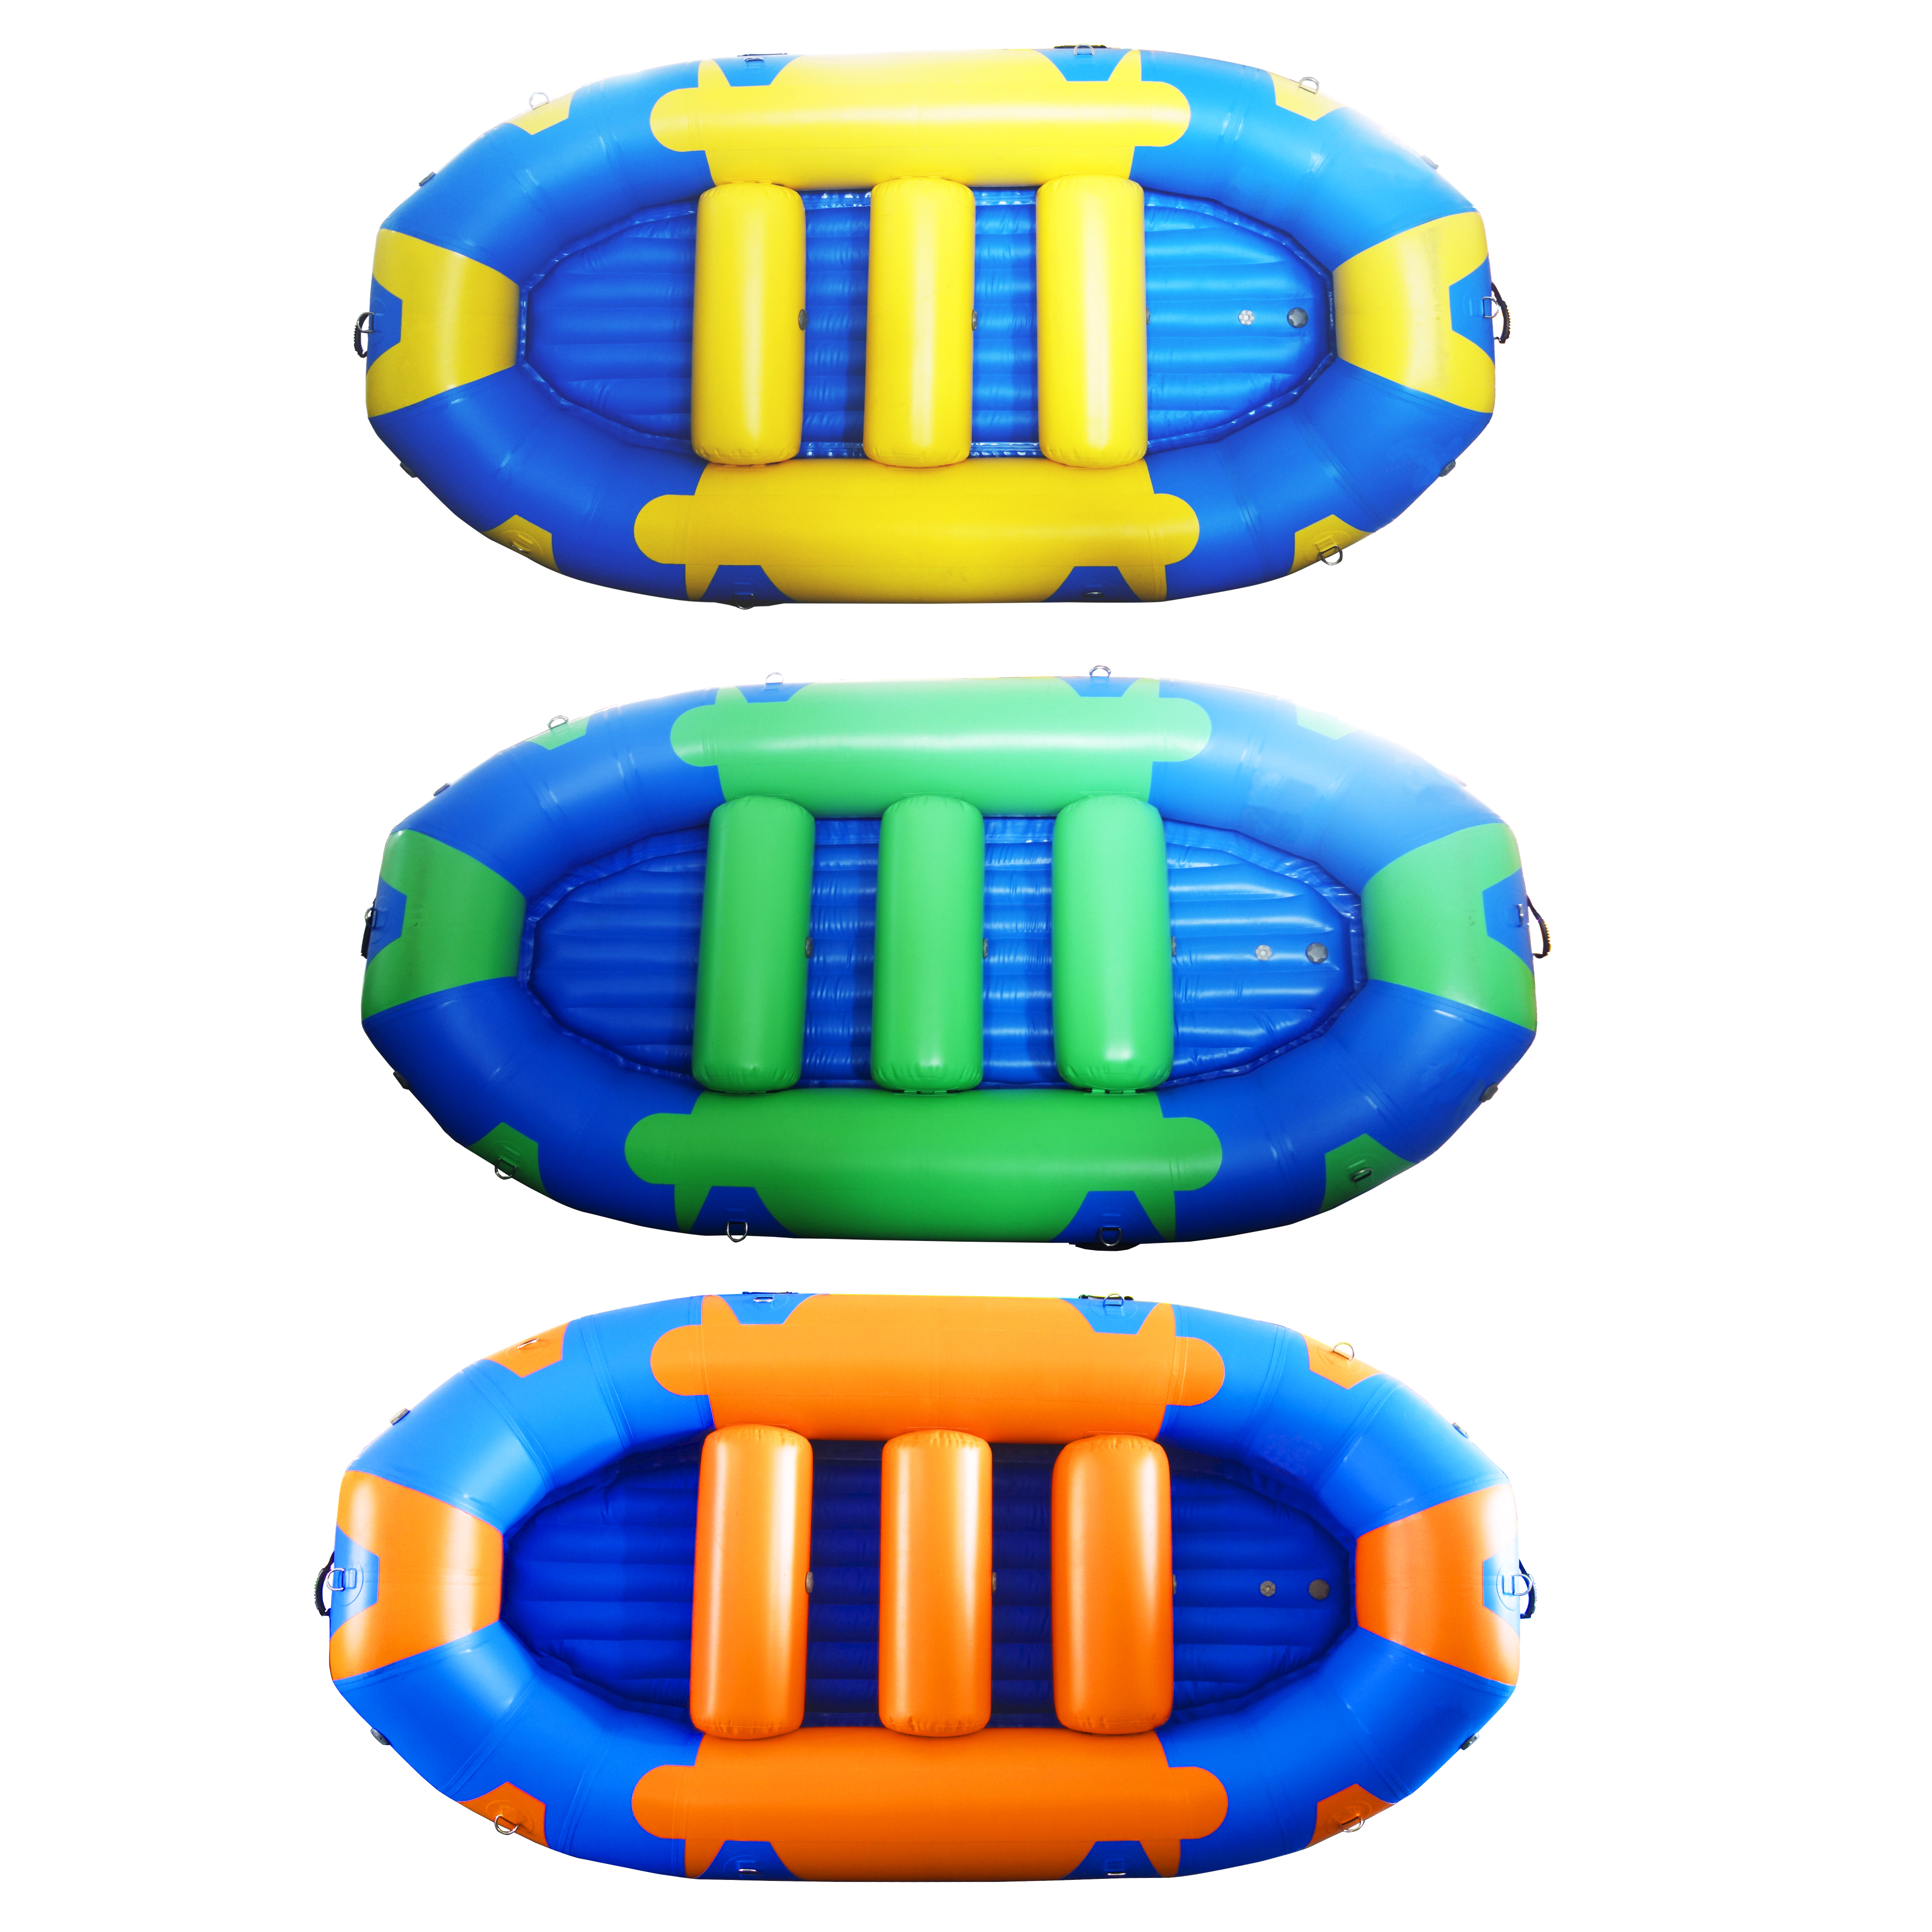 Cheap Whitewater Adventure Inflatable River Raft Fishing Boat